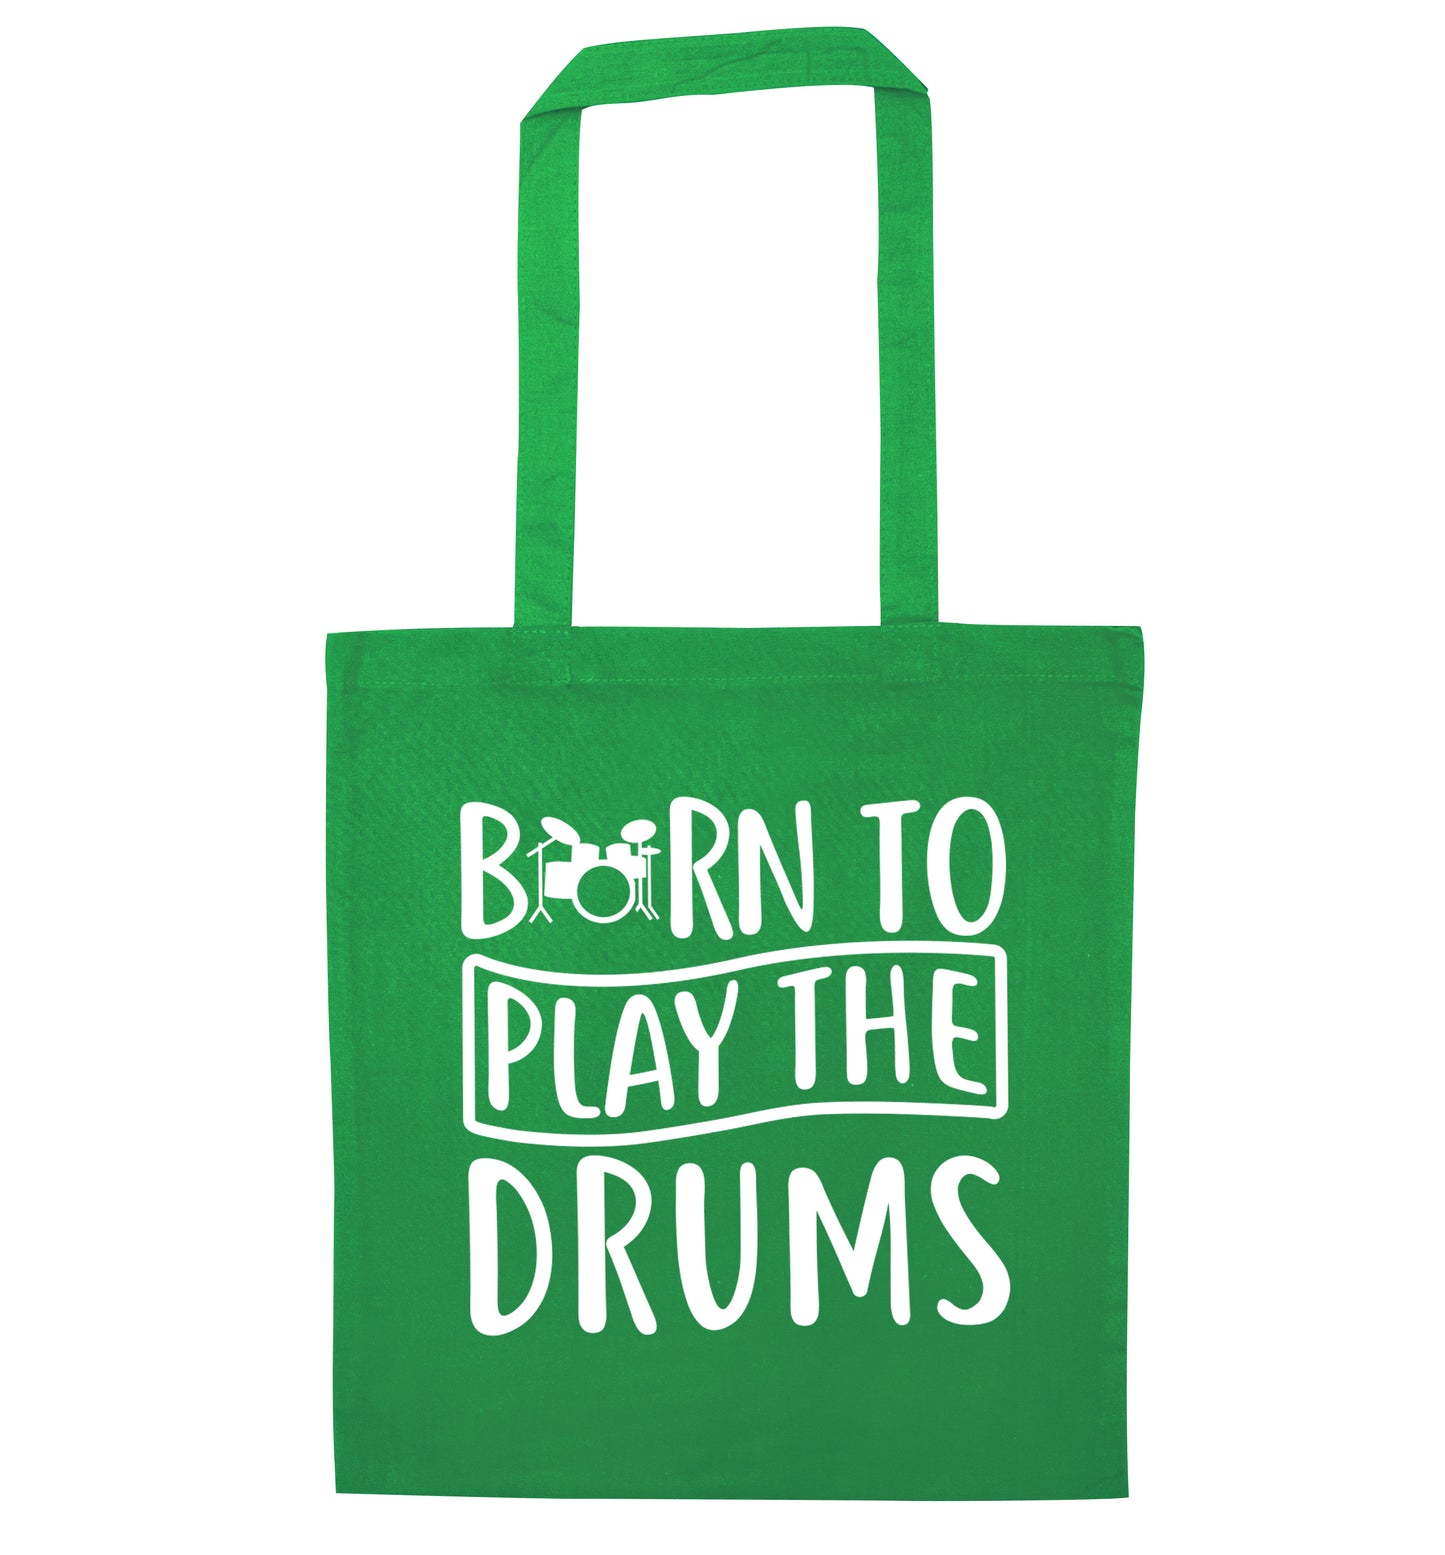 Born to play the drums green tote bag